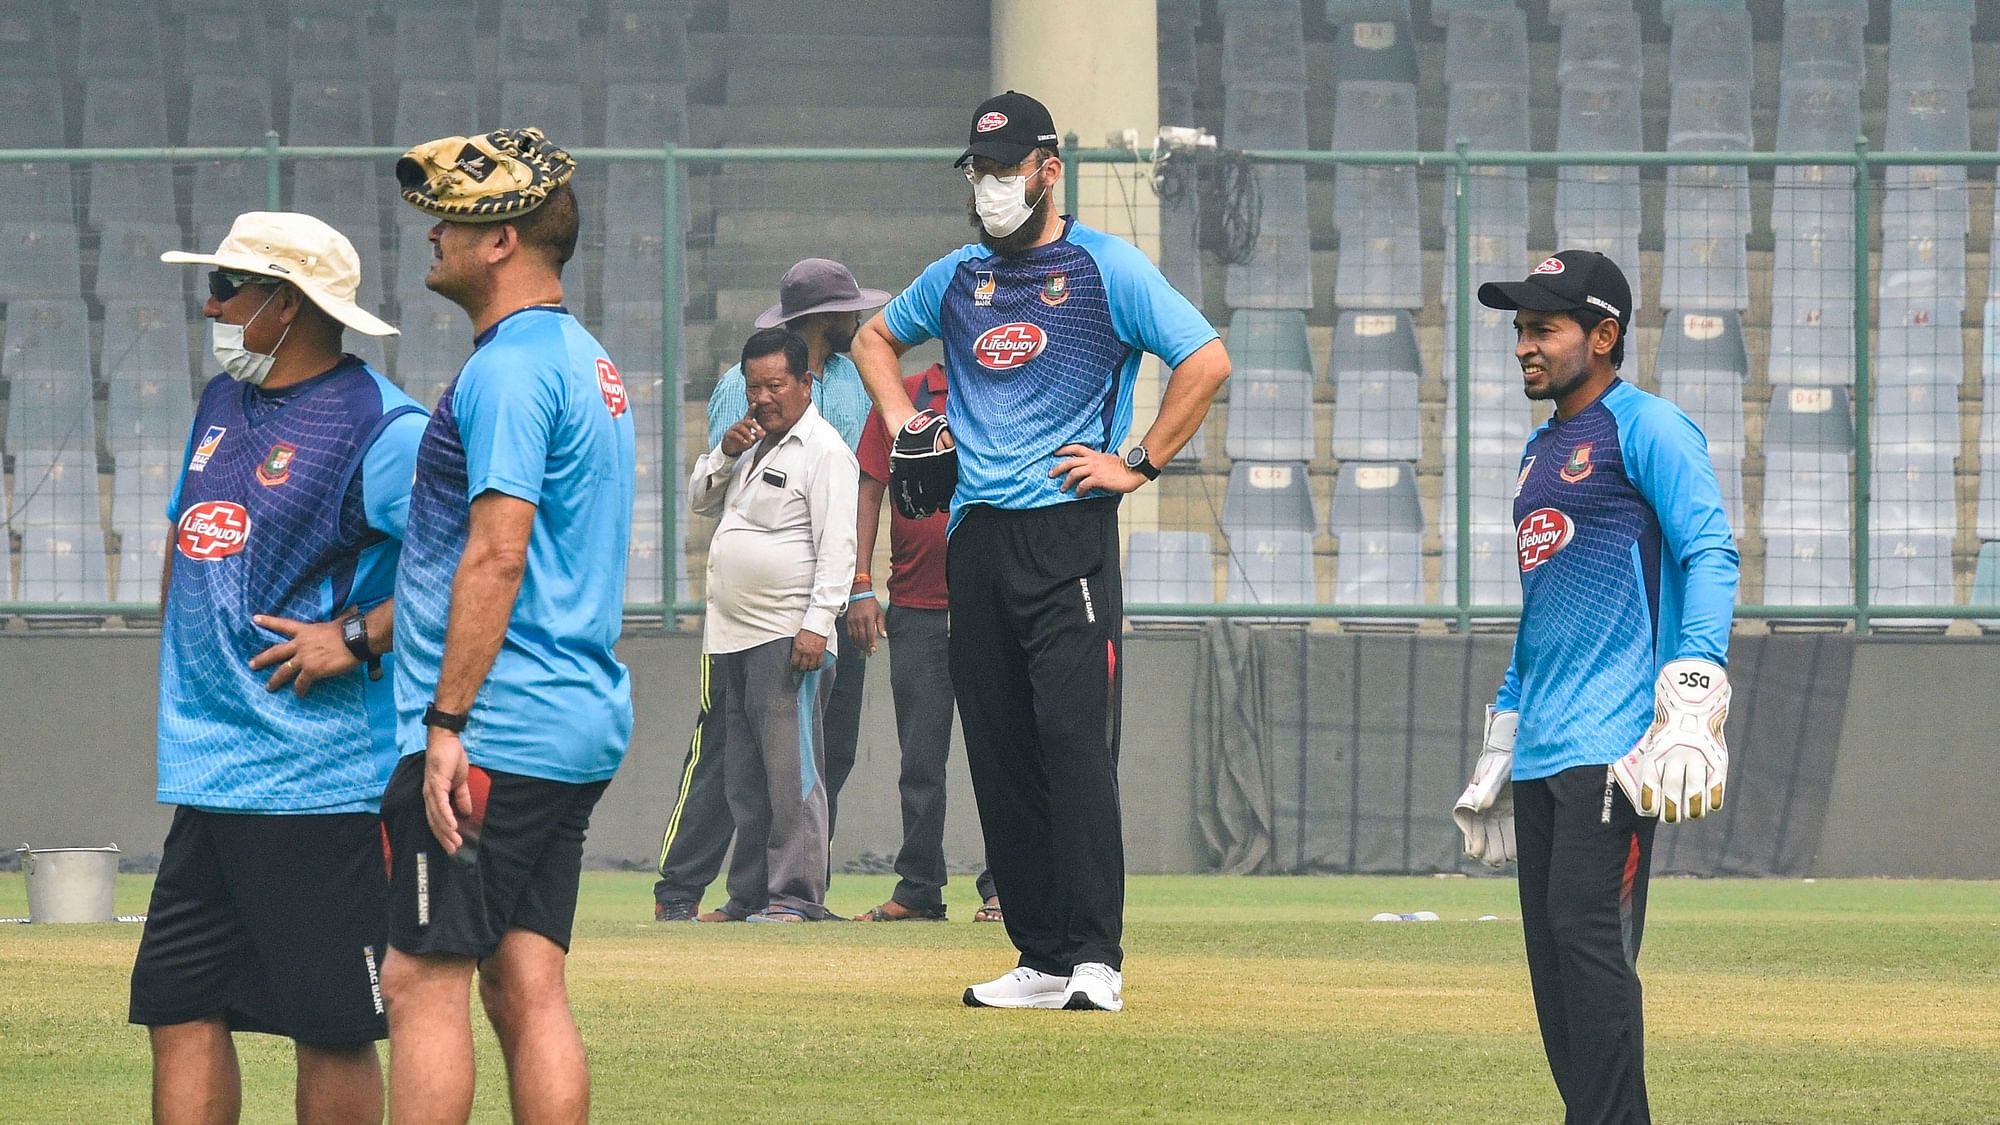 Bangladeshi cricketer Mushfiqur Rahim with coach Daniel Vettori and other support staff members during a practice session at Arun Jaitley Stadium in New Delhi, Friday, Nov. 1, 2019.&nbsp;